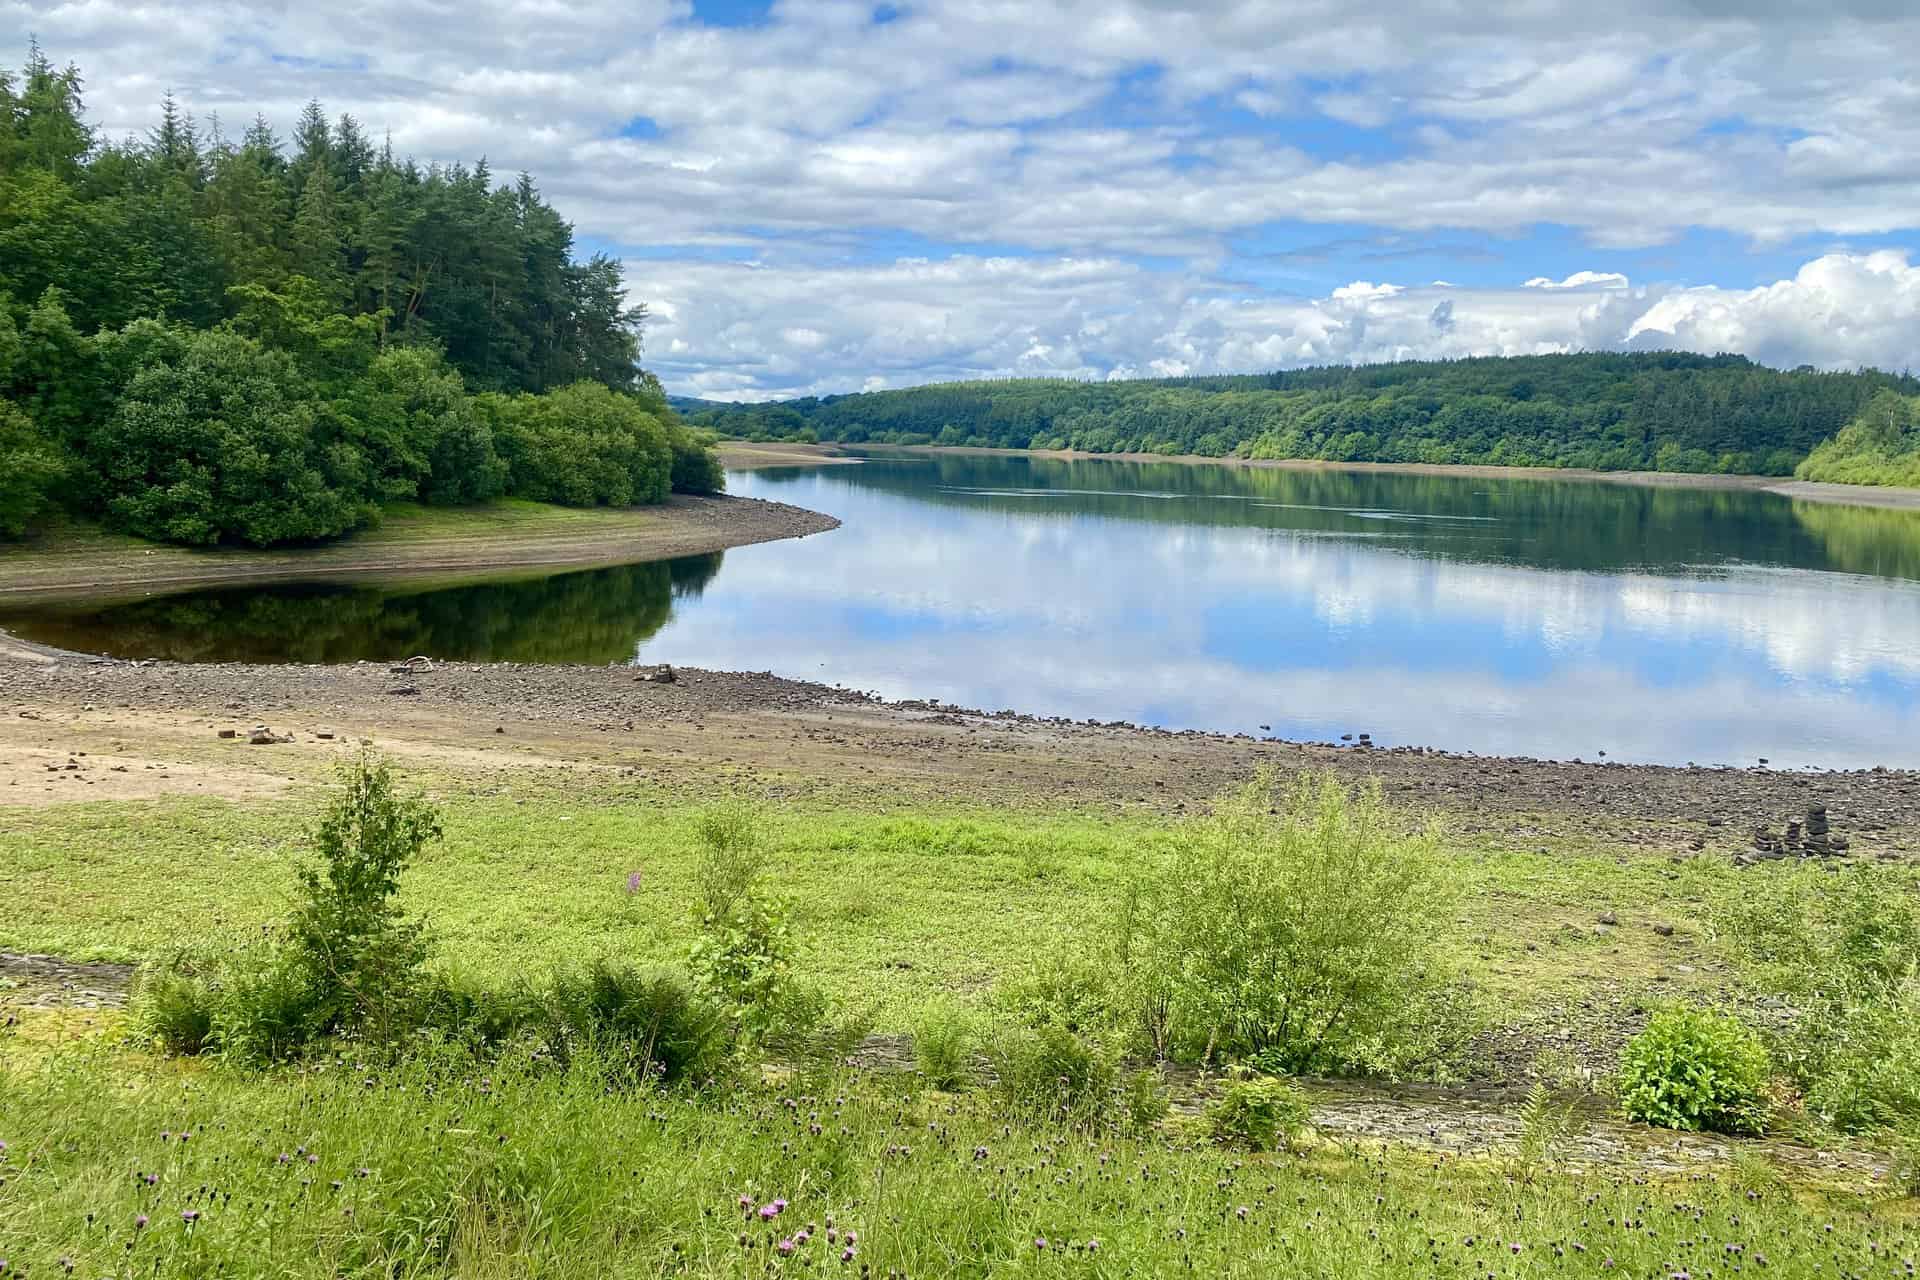 The southern tip of Fewston Reservoir's banks, providing a scenic viewpoint of the reservoir.